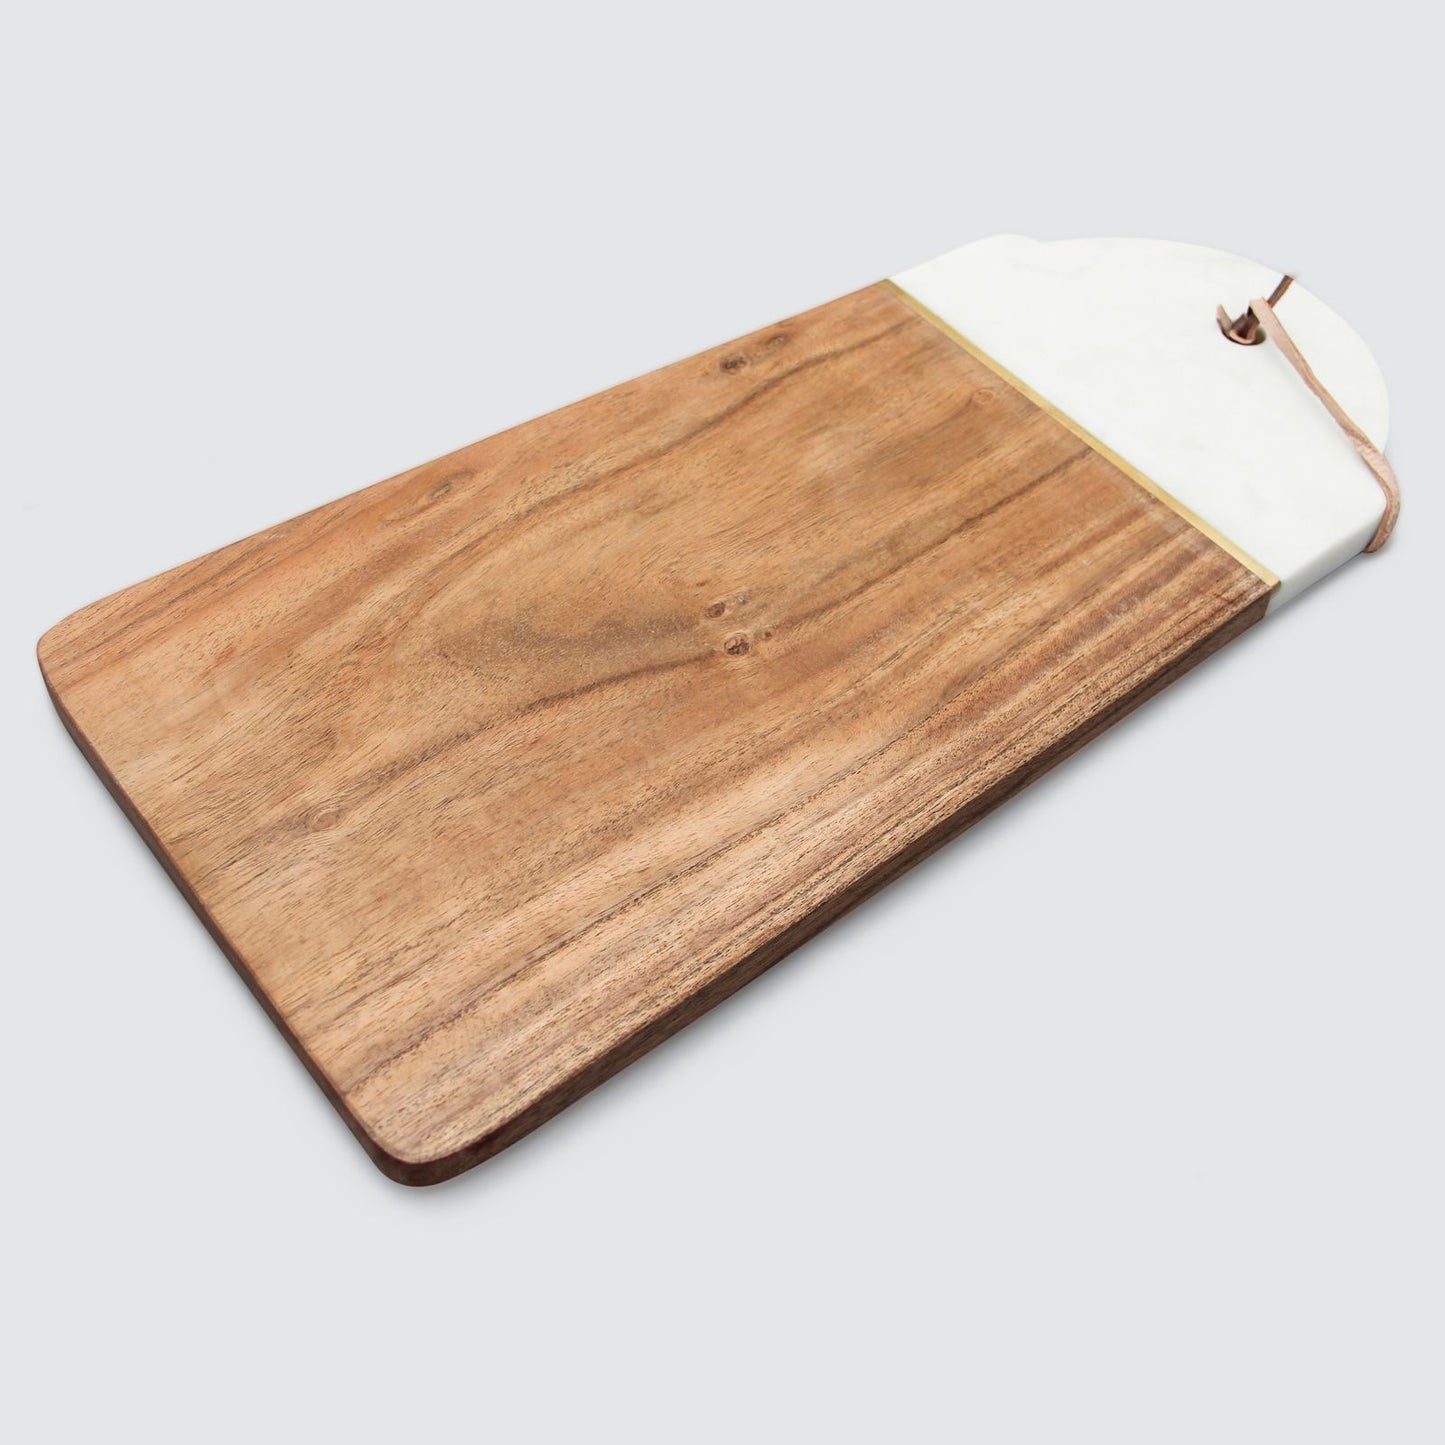 White marble and acacia wood cutting board.